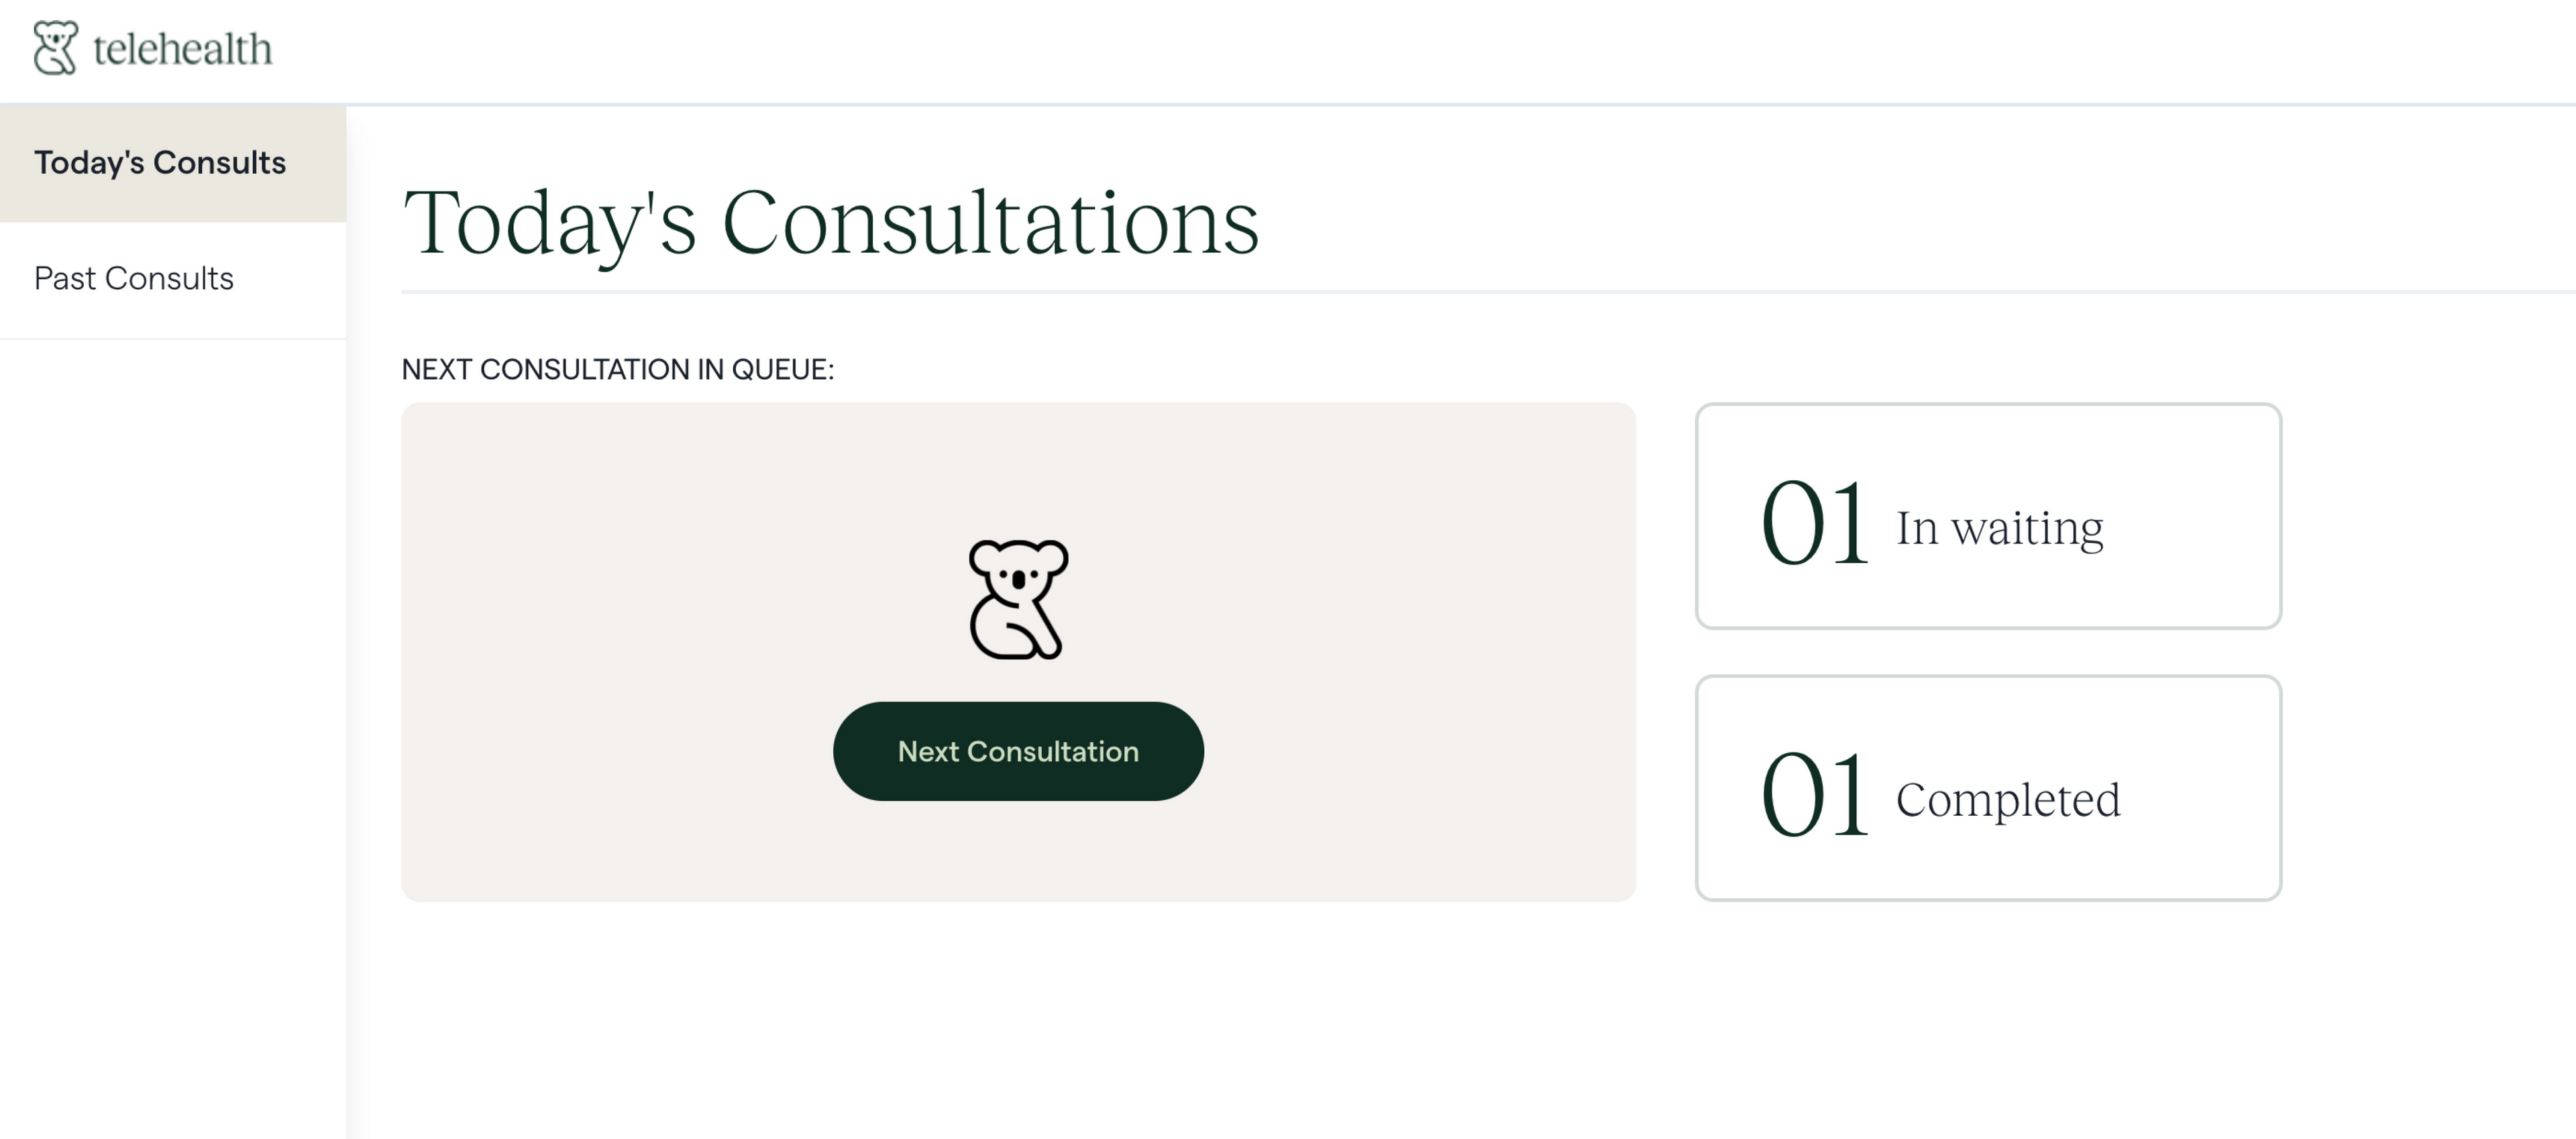 An example of a consultation page with a waiting and completed queue